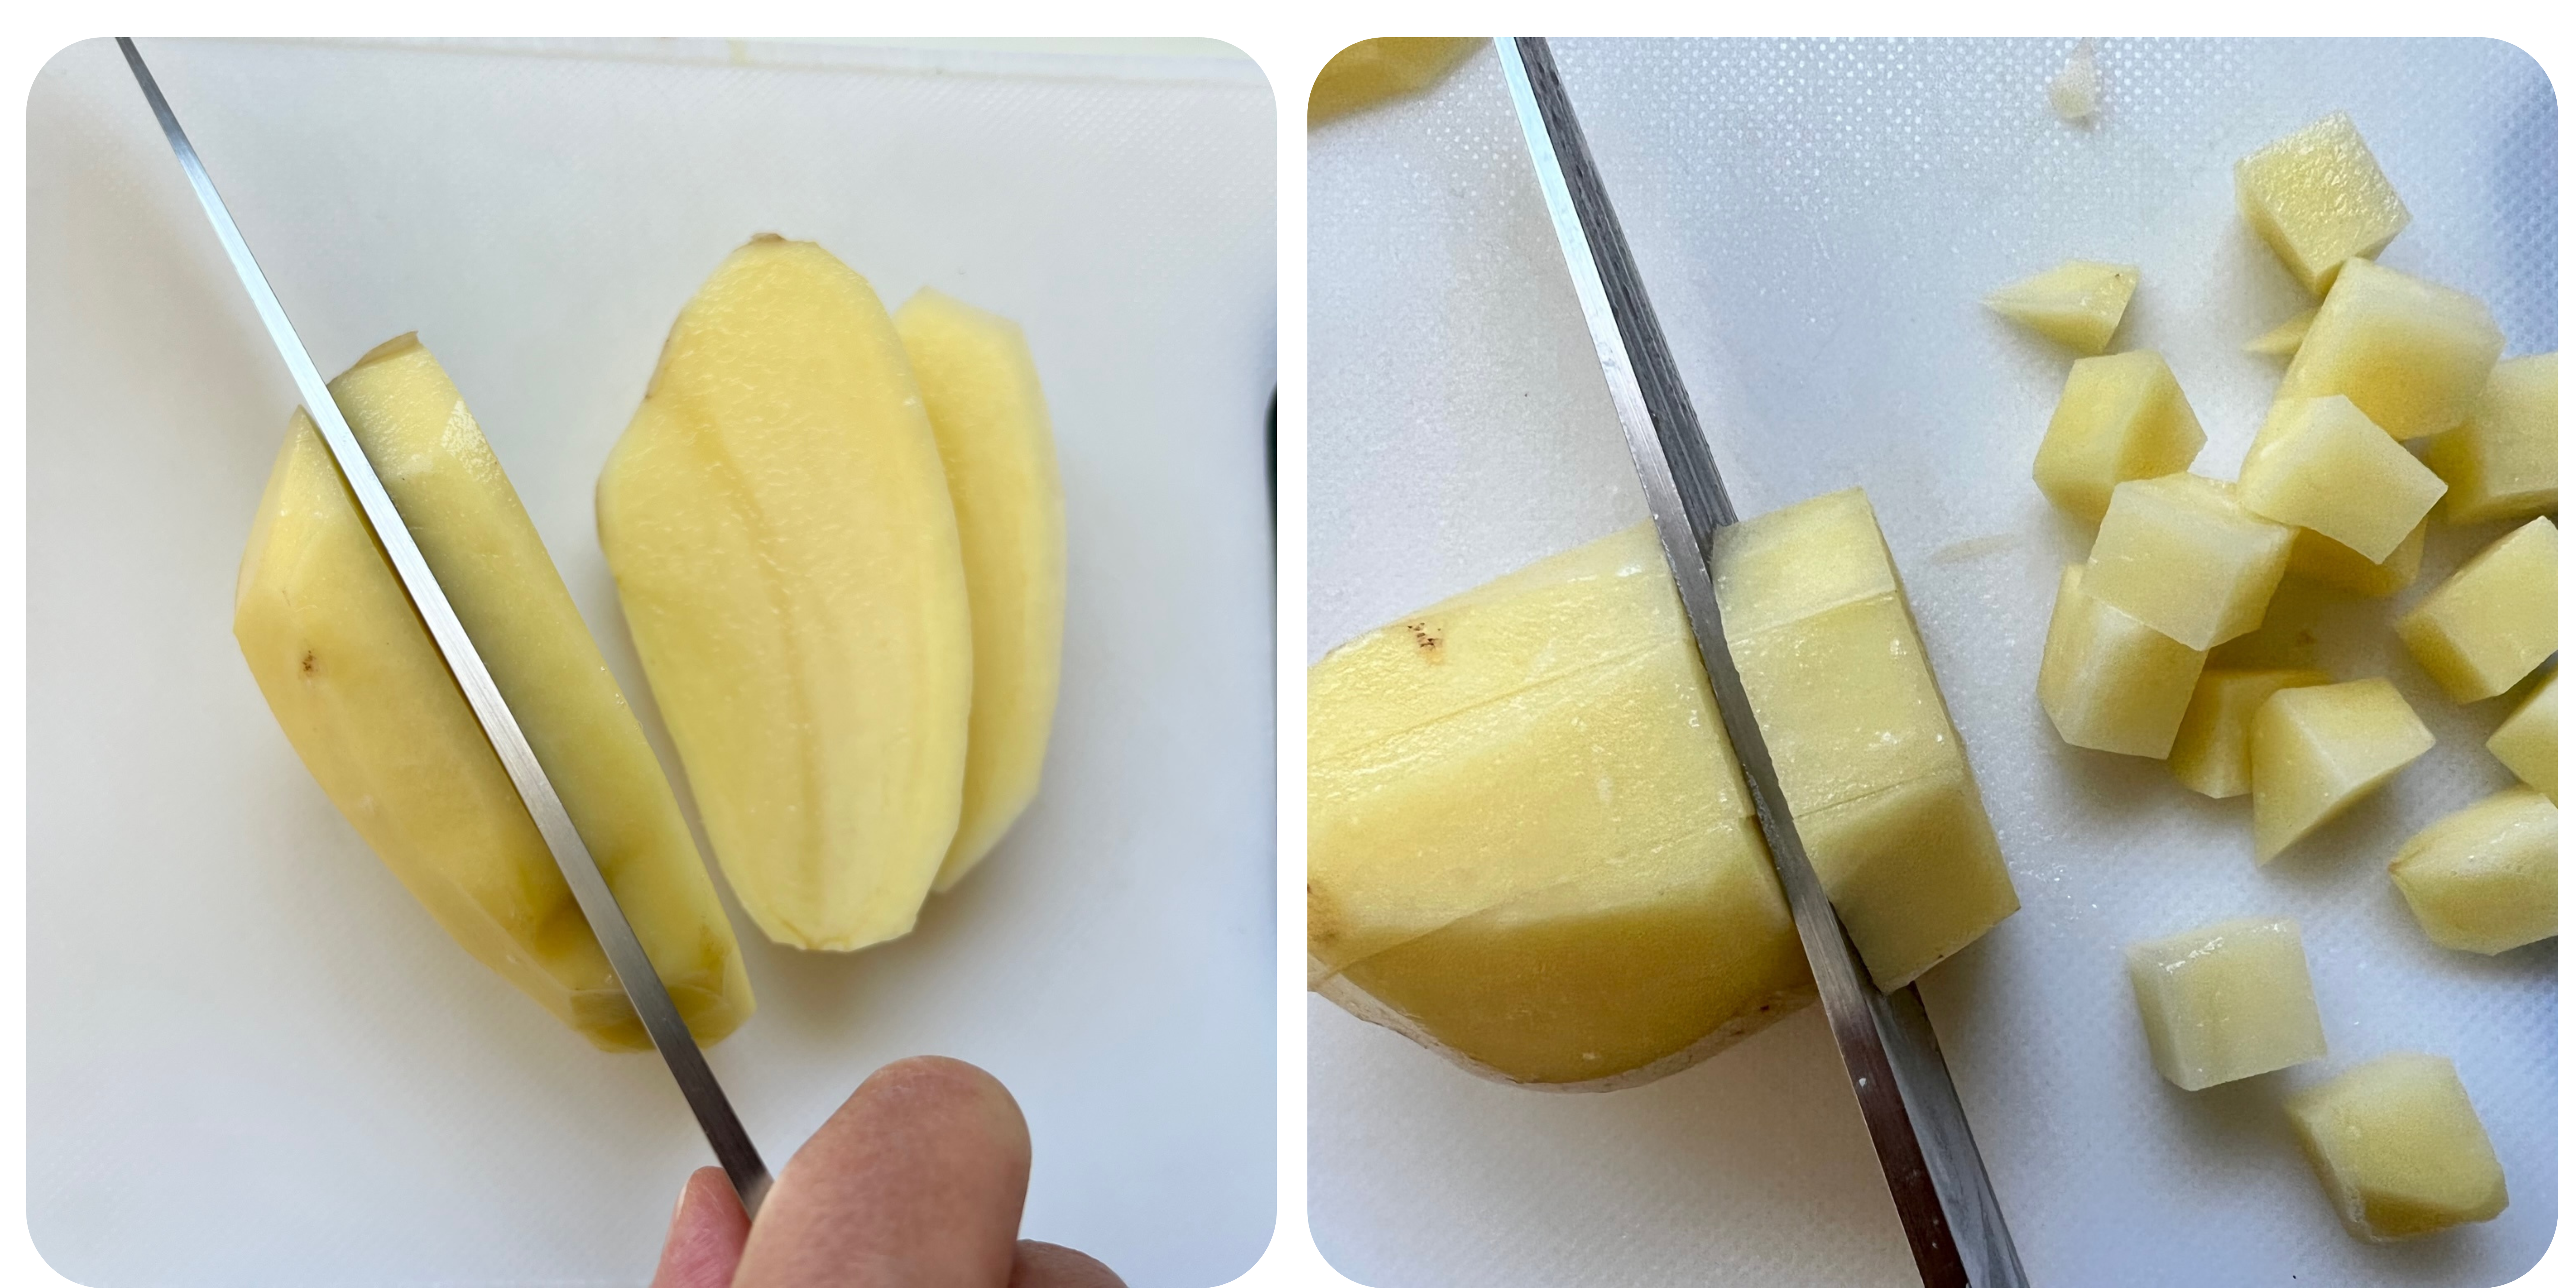 Two-pictures showing how to dice the potatoes for the Brazilian Potato Salad.  Left: slicing peeled potato.  Right: Dicing the sliced potato.